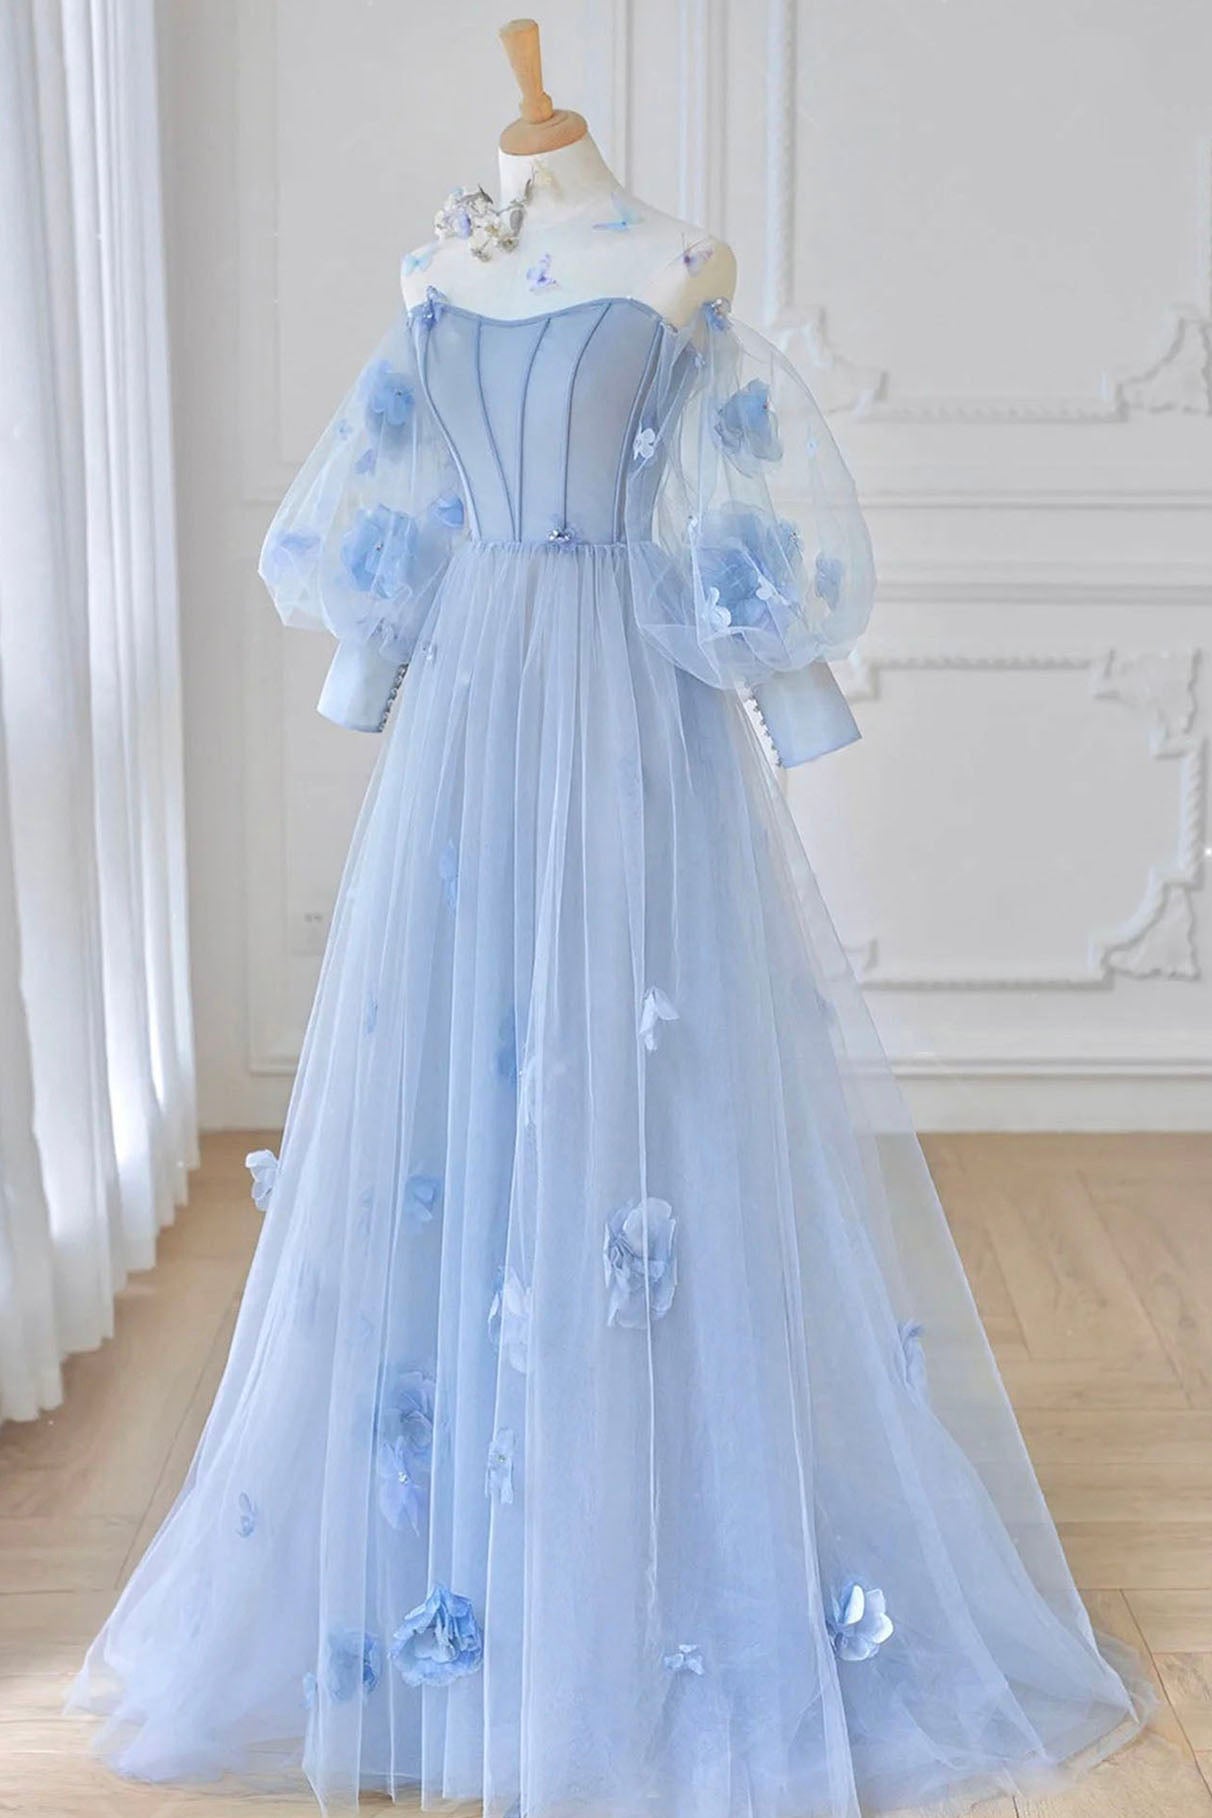 Blue Tulle Flowers Long Corset Prom Dress, Lovely A-Line Puff Sleeve Evening Dress outfit, Bridesmaid Dresses White